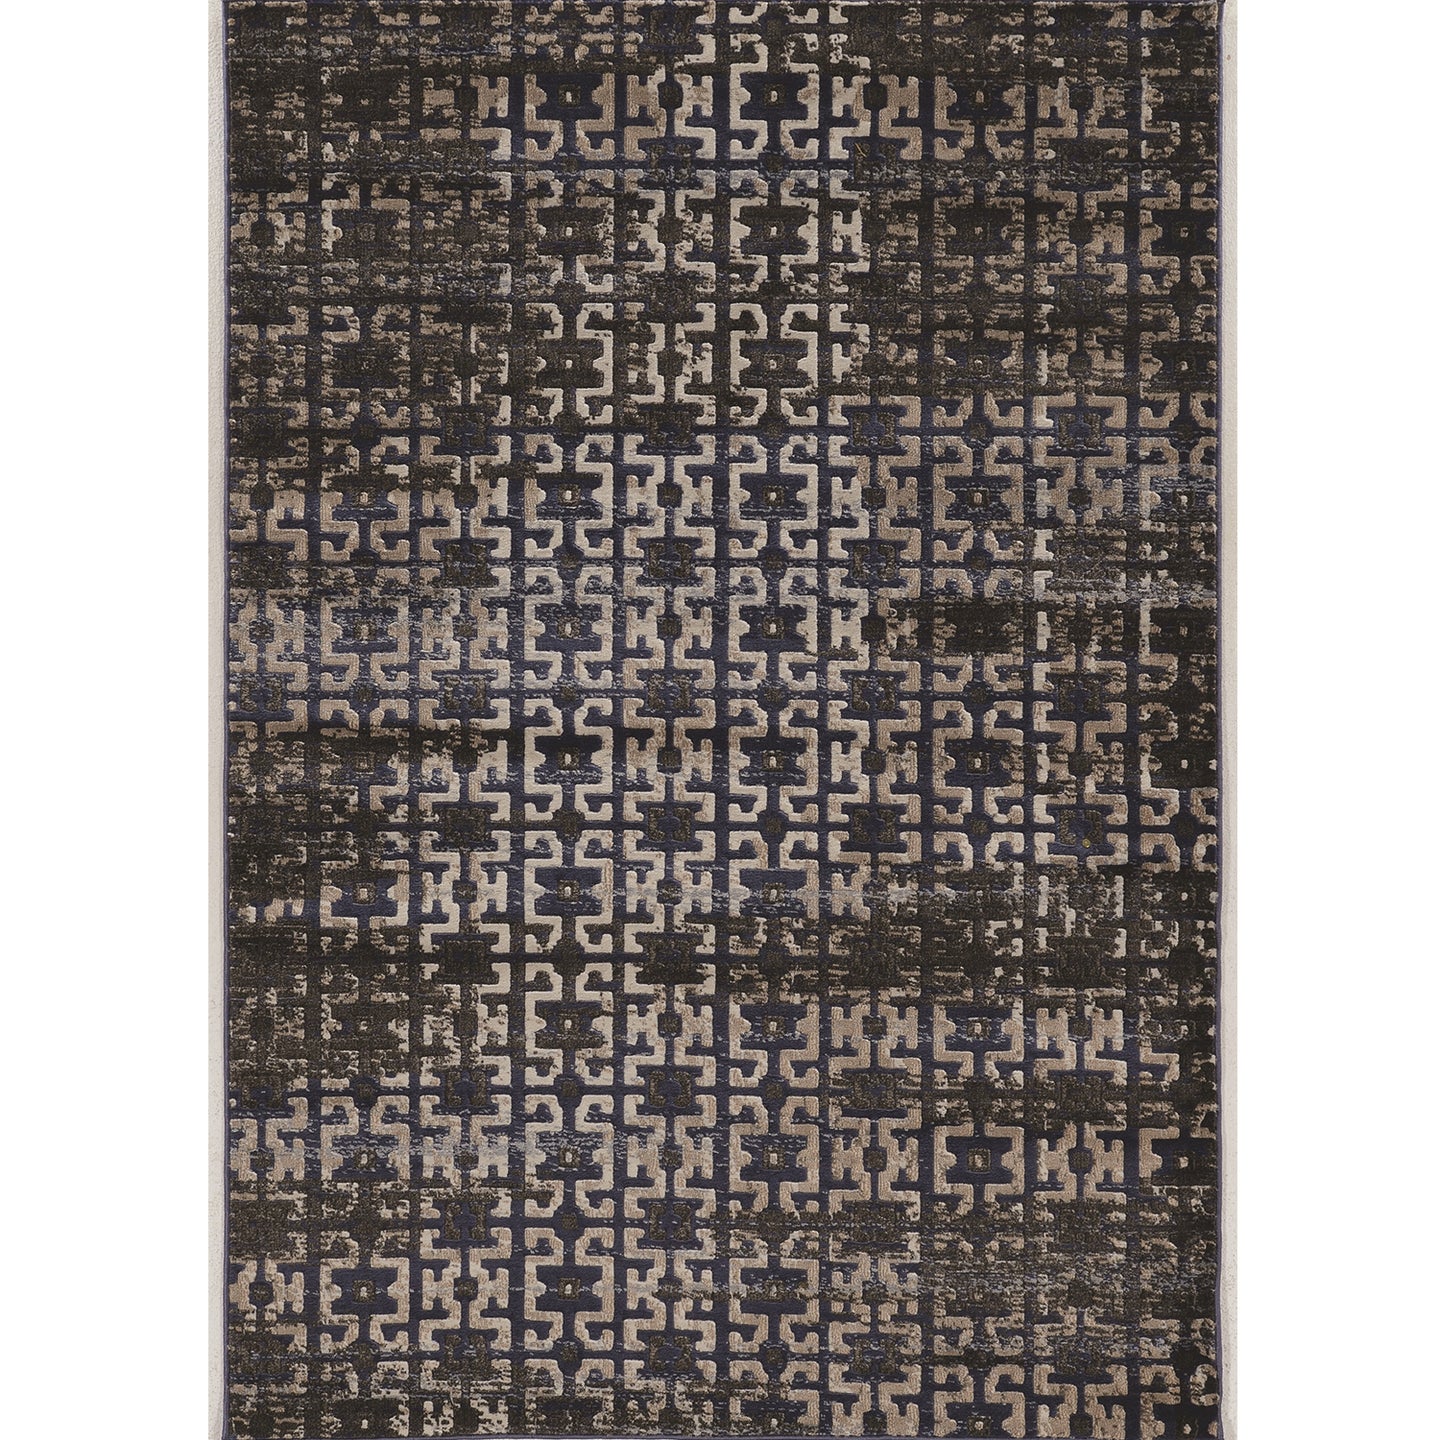 ANTIQUE COLLECTION I RUG